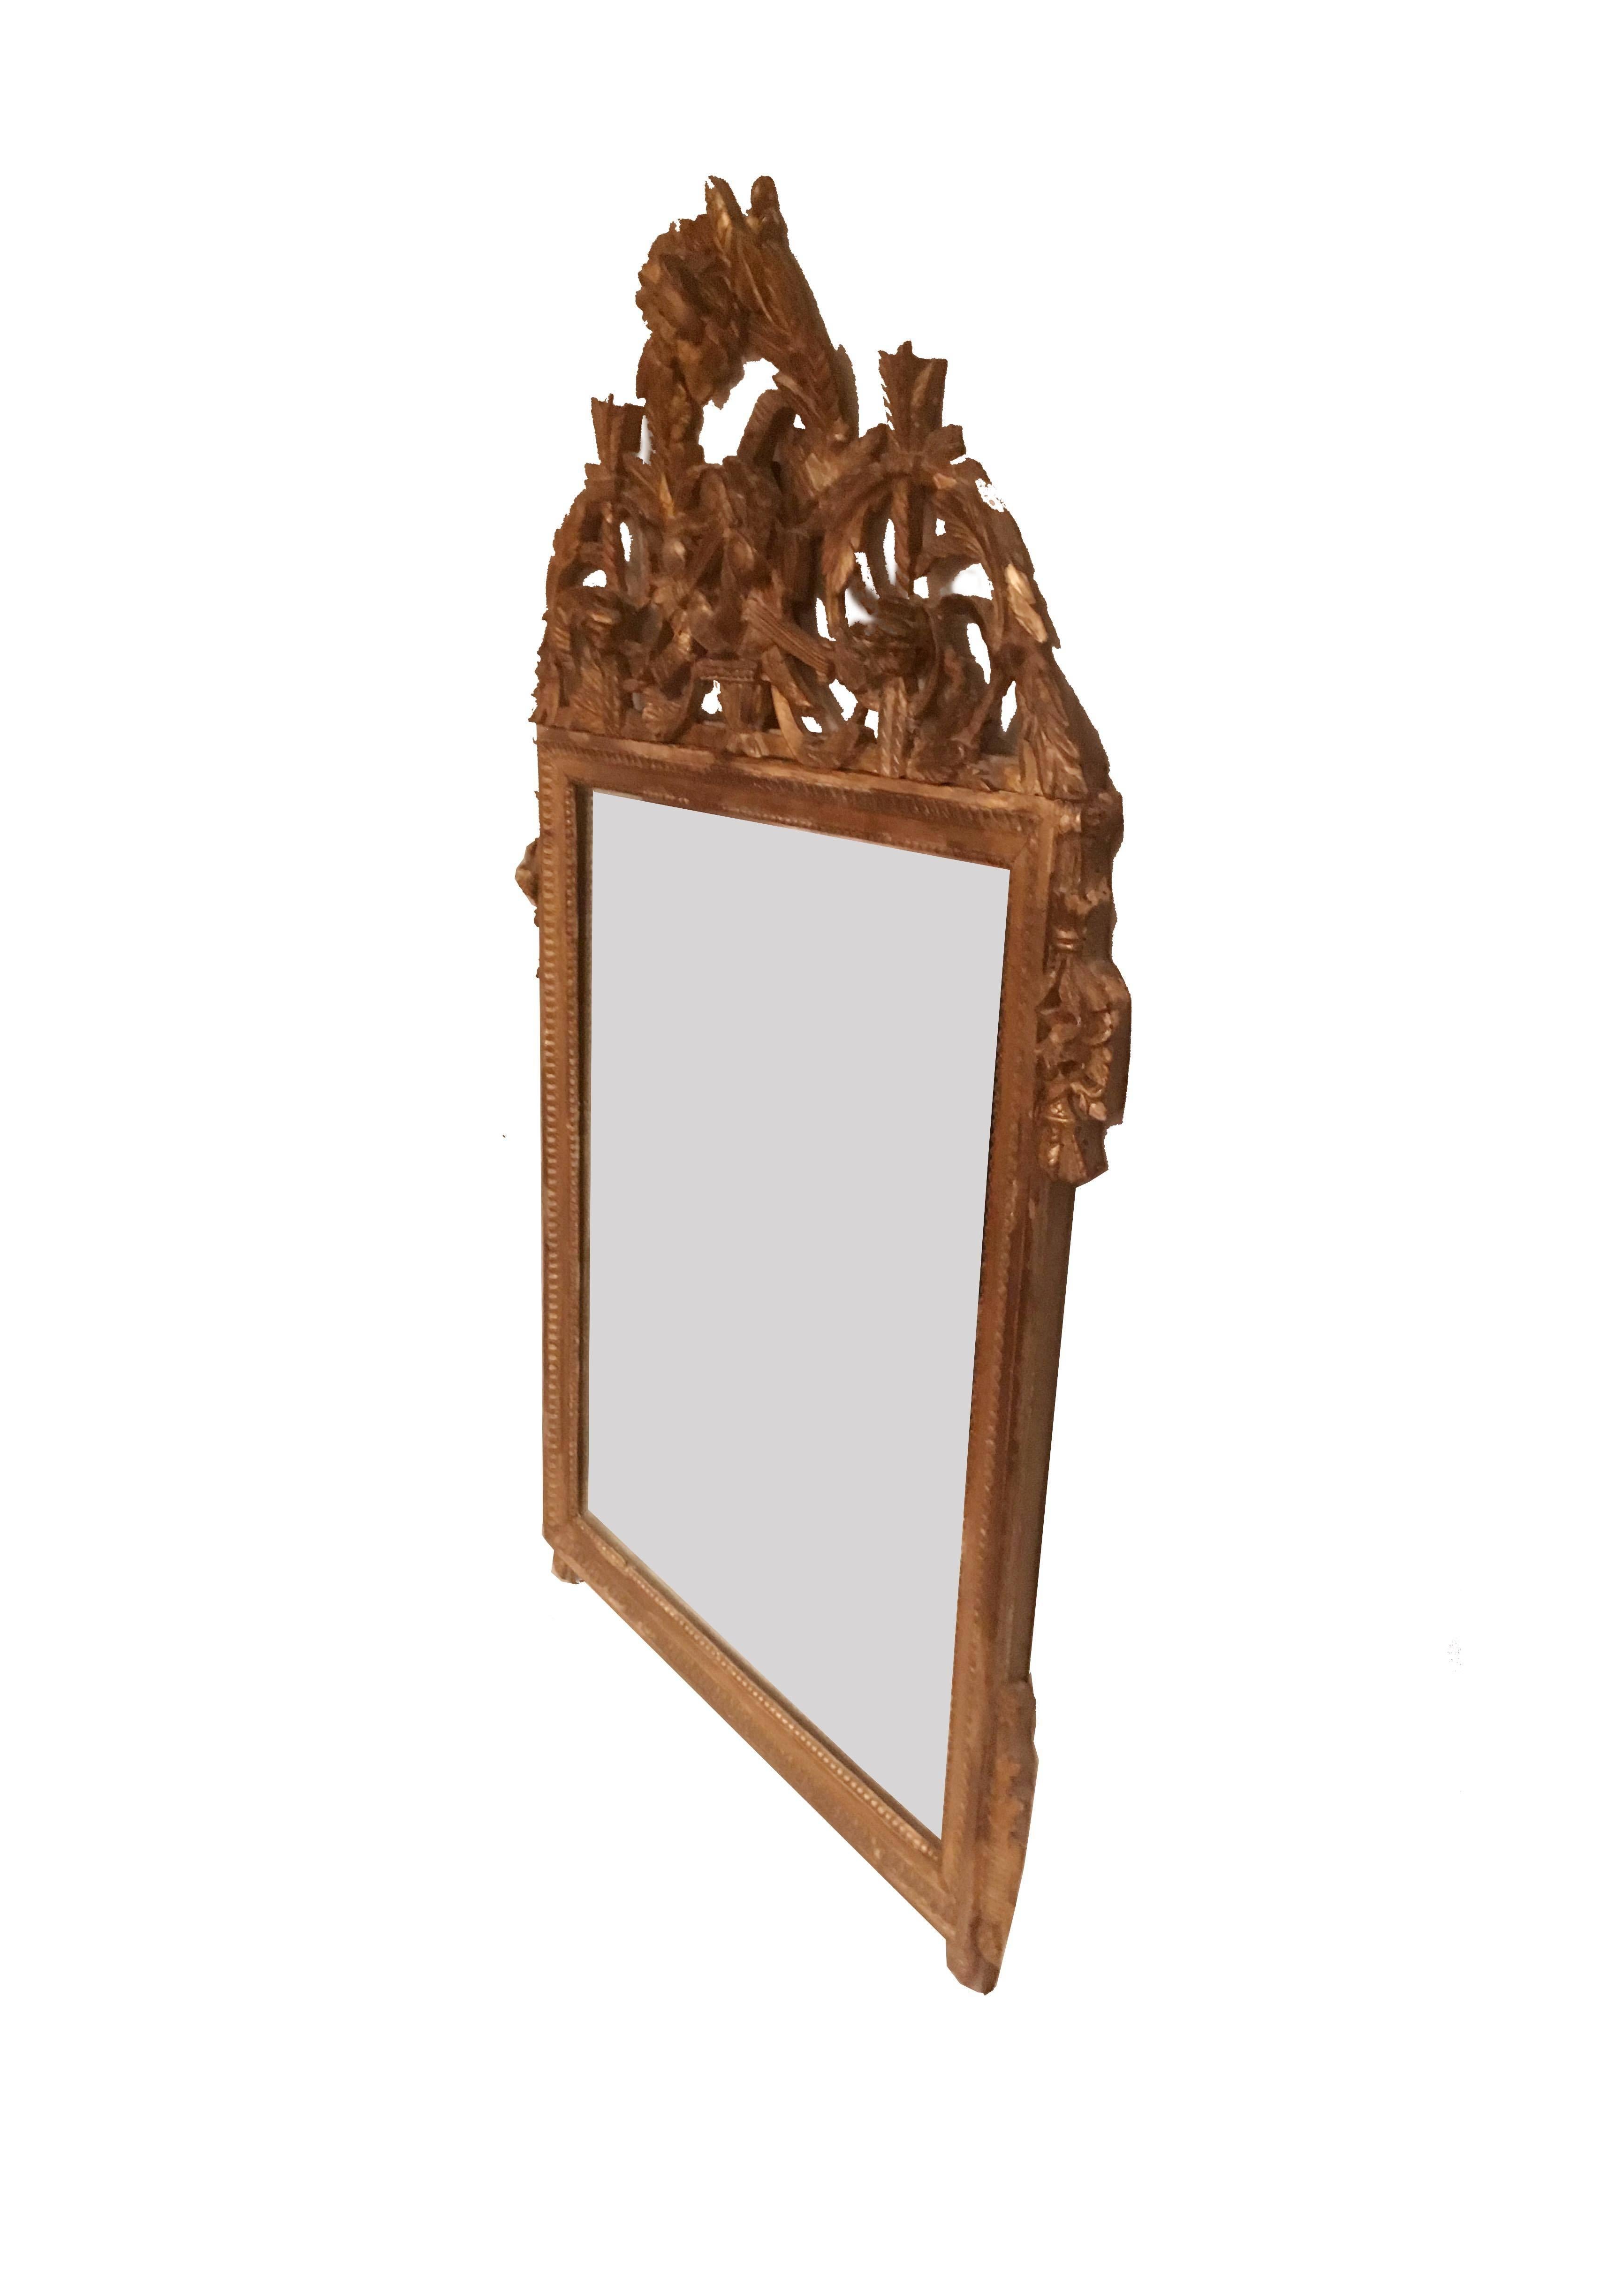 Late 18th century Louis XVI French gilt mirror with elaborate crown. The frame exhibits lambs tongue and beading detail while the surmount contains laurel wreaths, lyres, garlands and swags. A fine classical mirror with 19th century patinated glass.